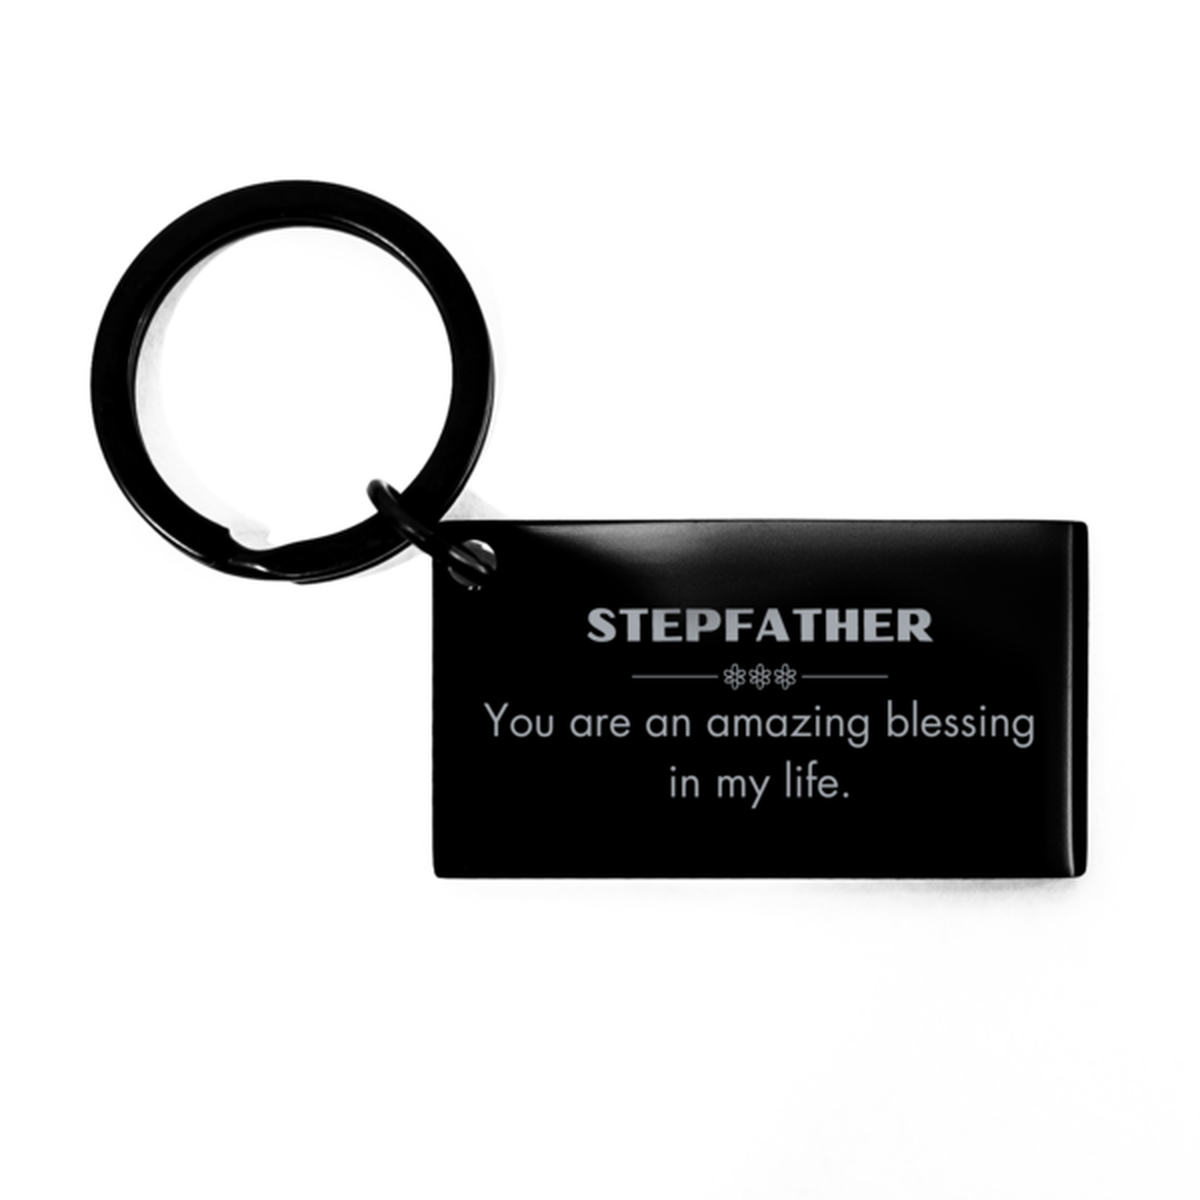 Stepfather Keychain, You are an amazing blessing in my life, Thank You Gifts For Stepfather, Inspirational Birthday Christmas Unique Gifts For Stepfather